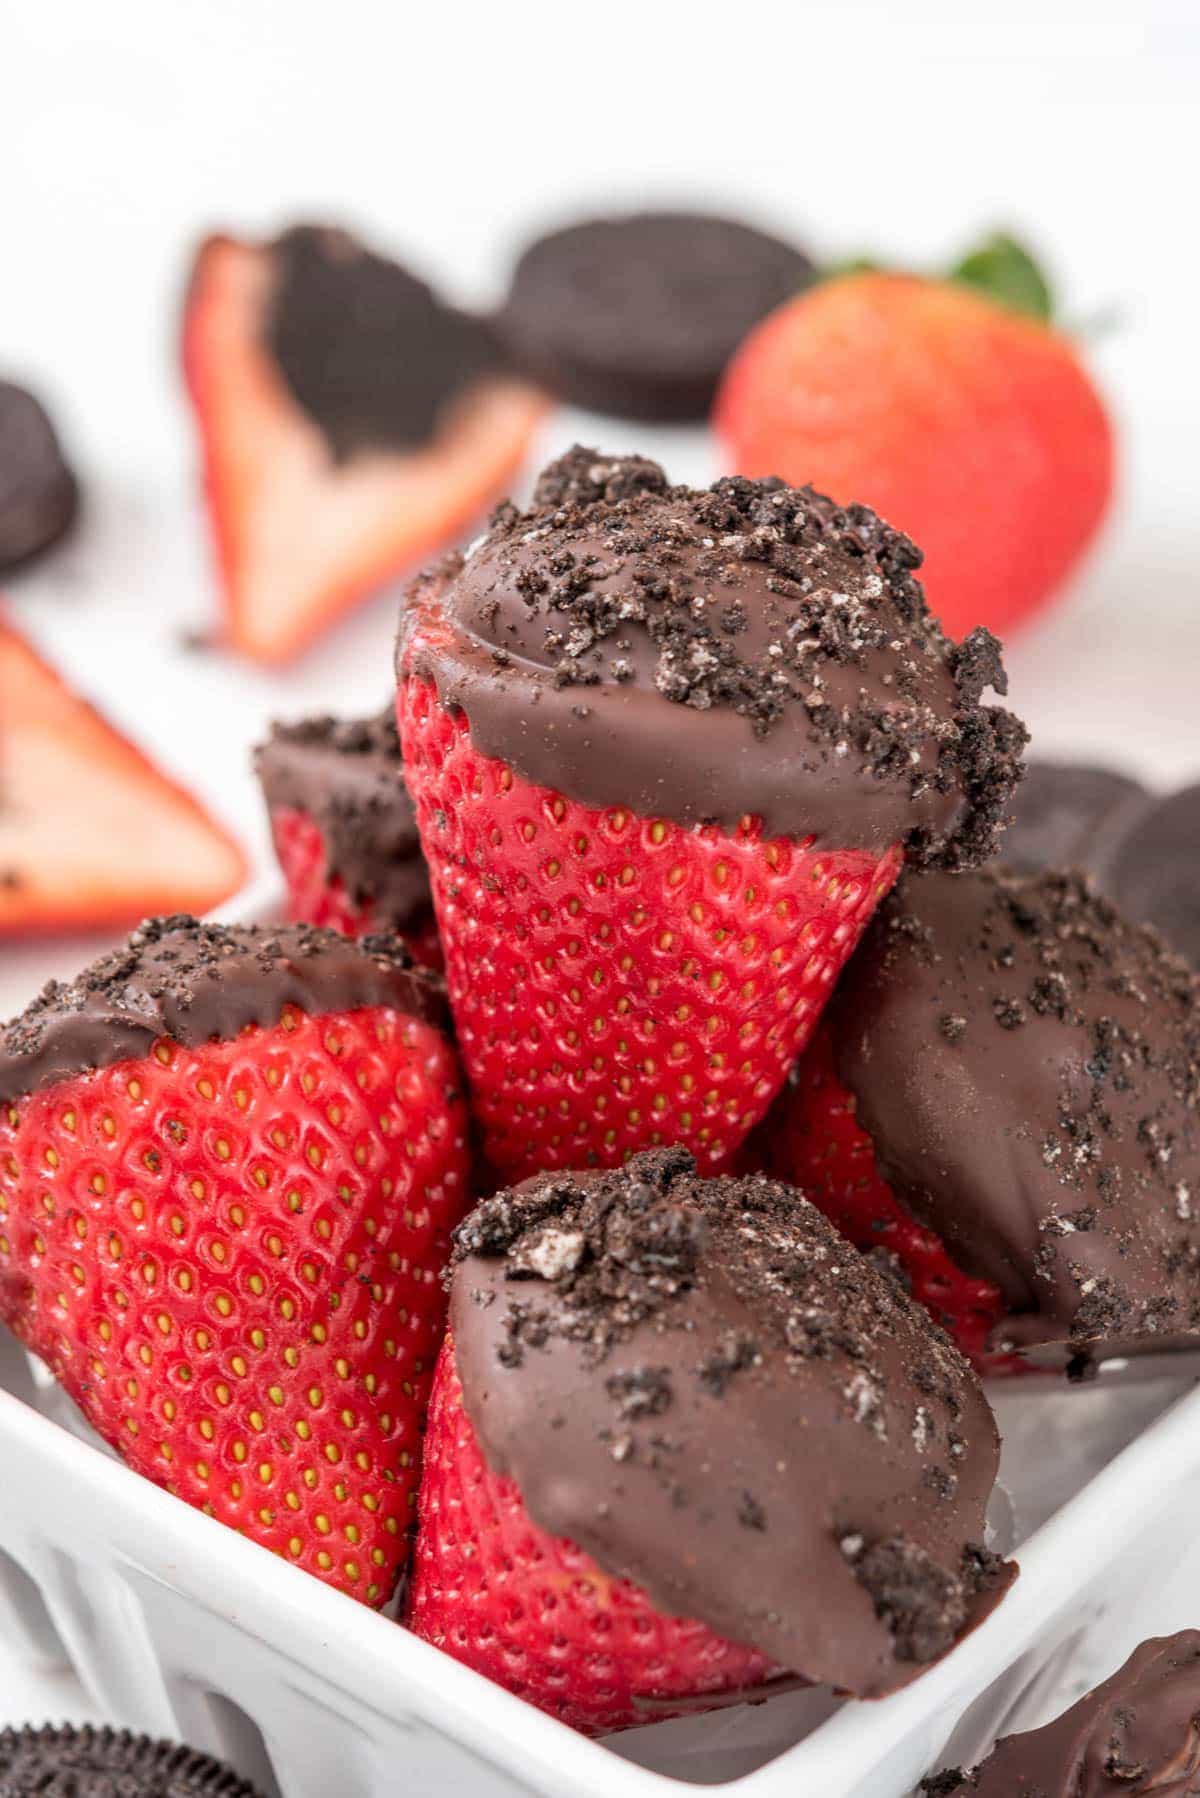 Oreo Truffle Dipped Strawberries - stuff strawberries with Oreo Truffles! I want a dozen of these today!